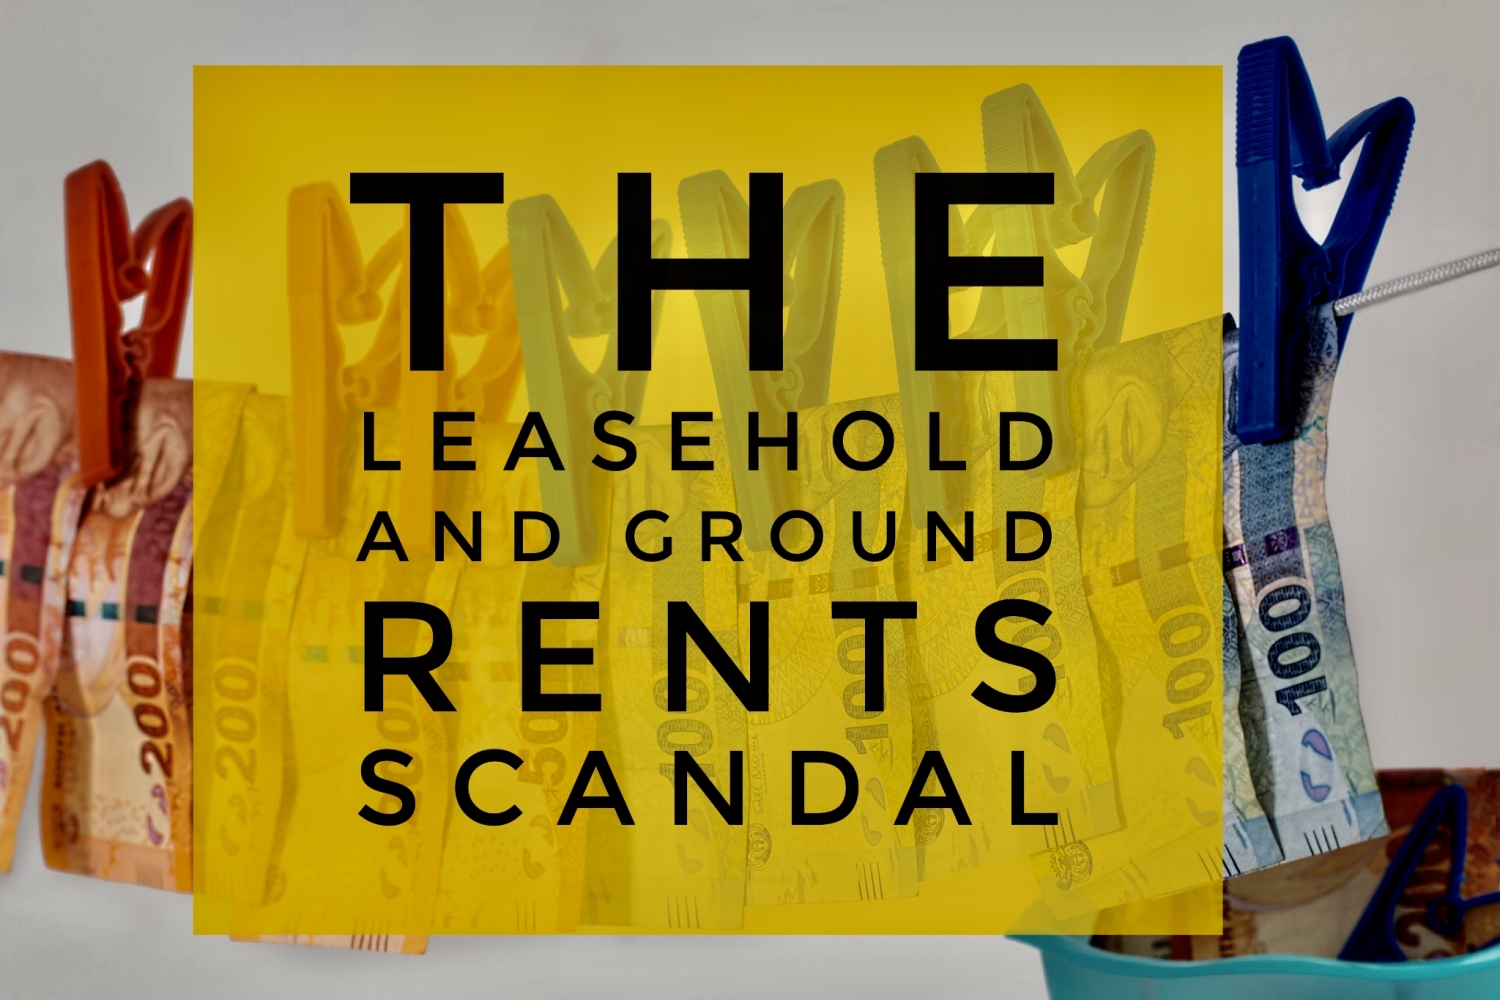 The leasehold and ground rents scandal of Bexley